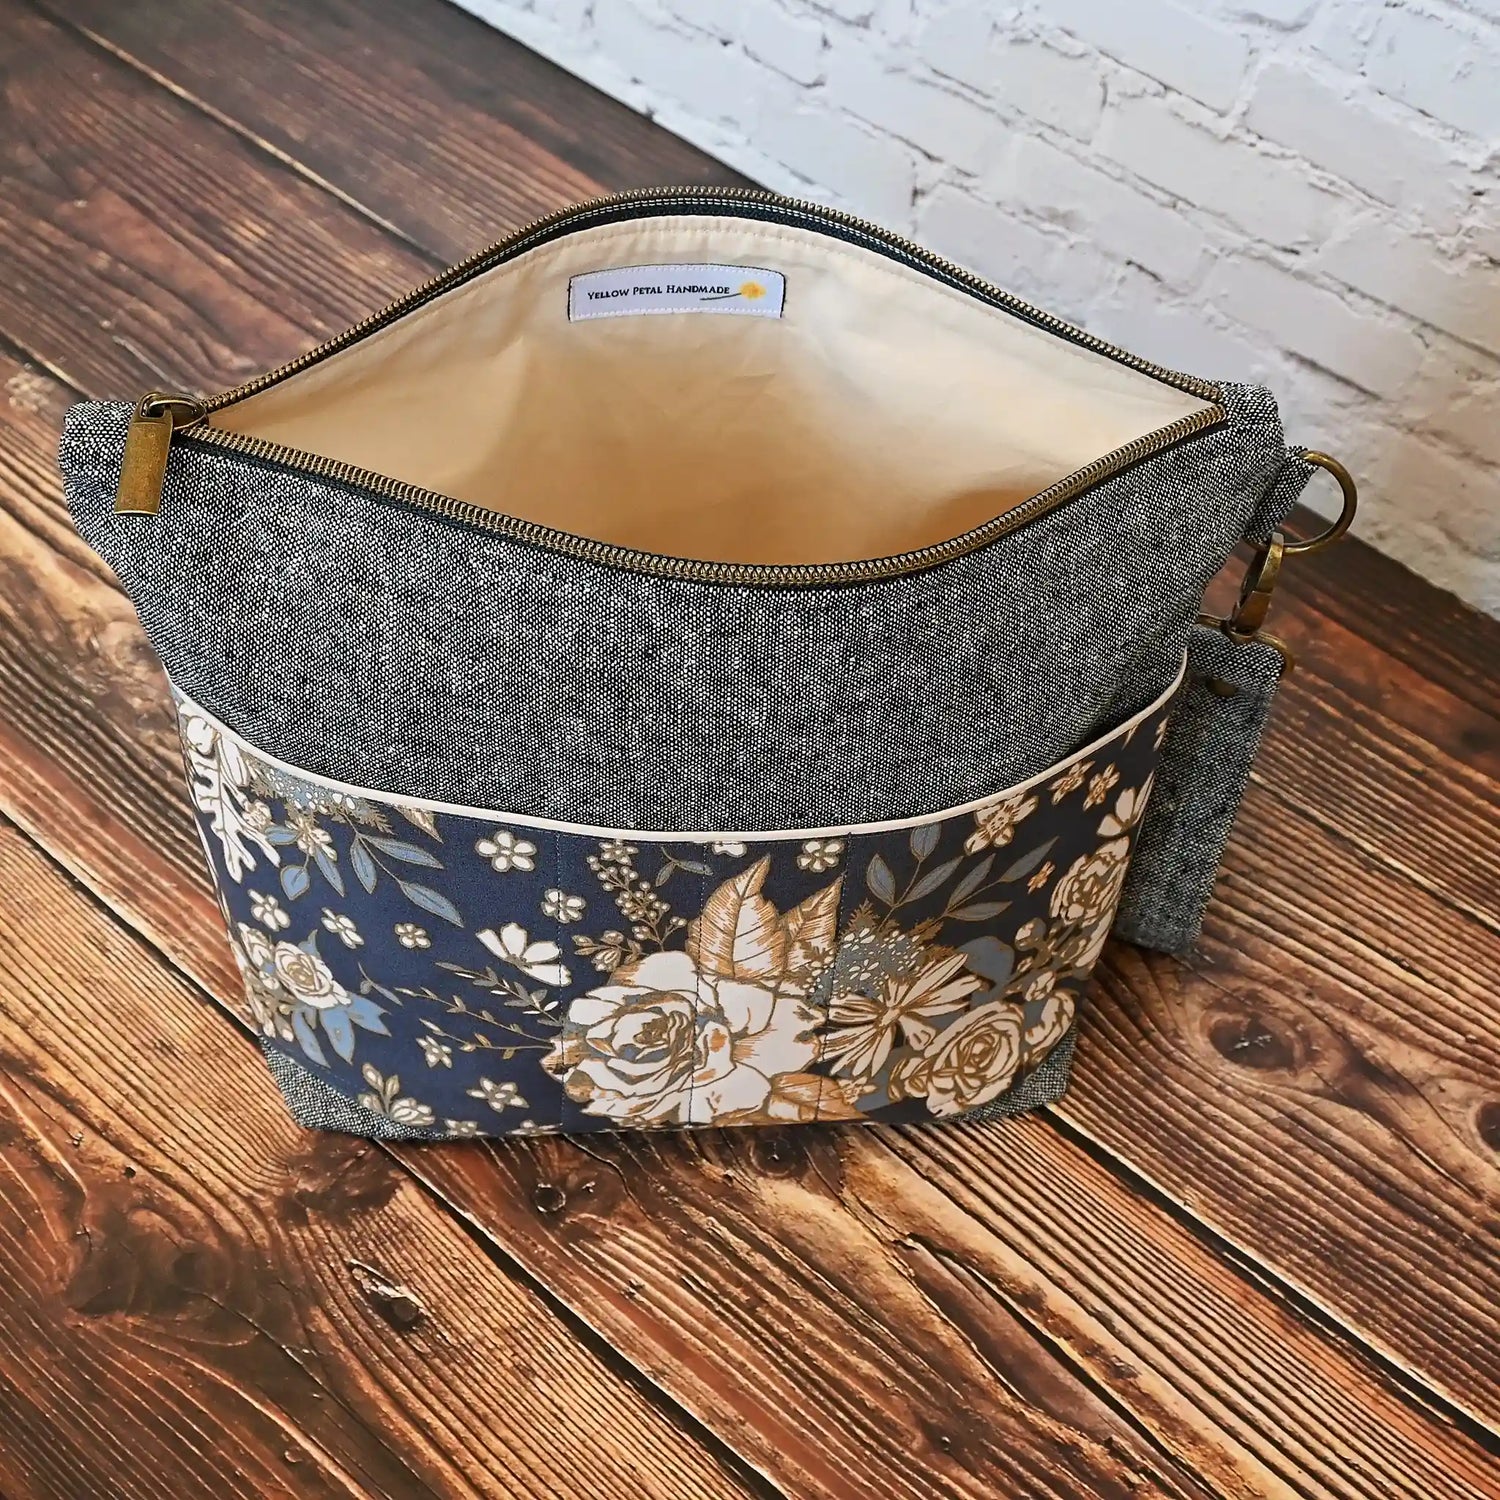 Beautiful linen project bag with exterior pockets made from a gorgeous navy floral cotton.  Handmade in Canada by Yellow Petal Handmade.